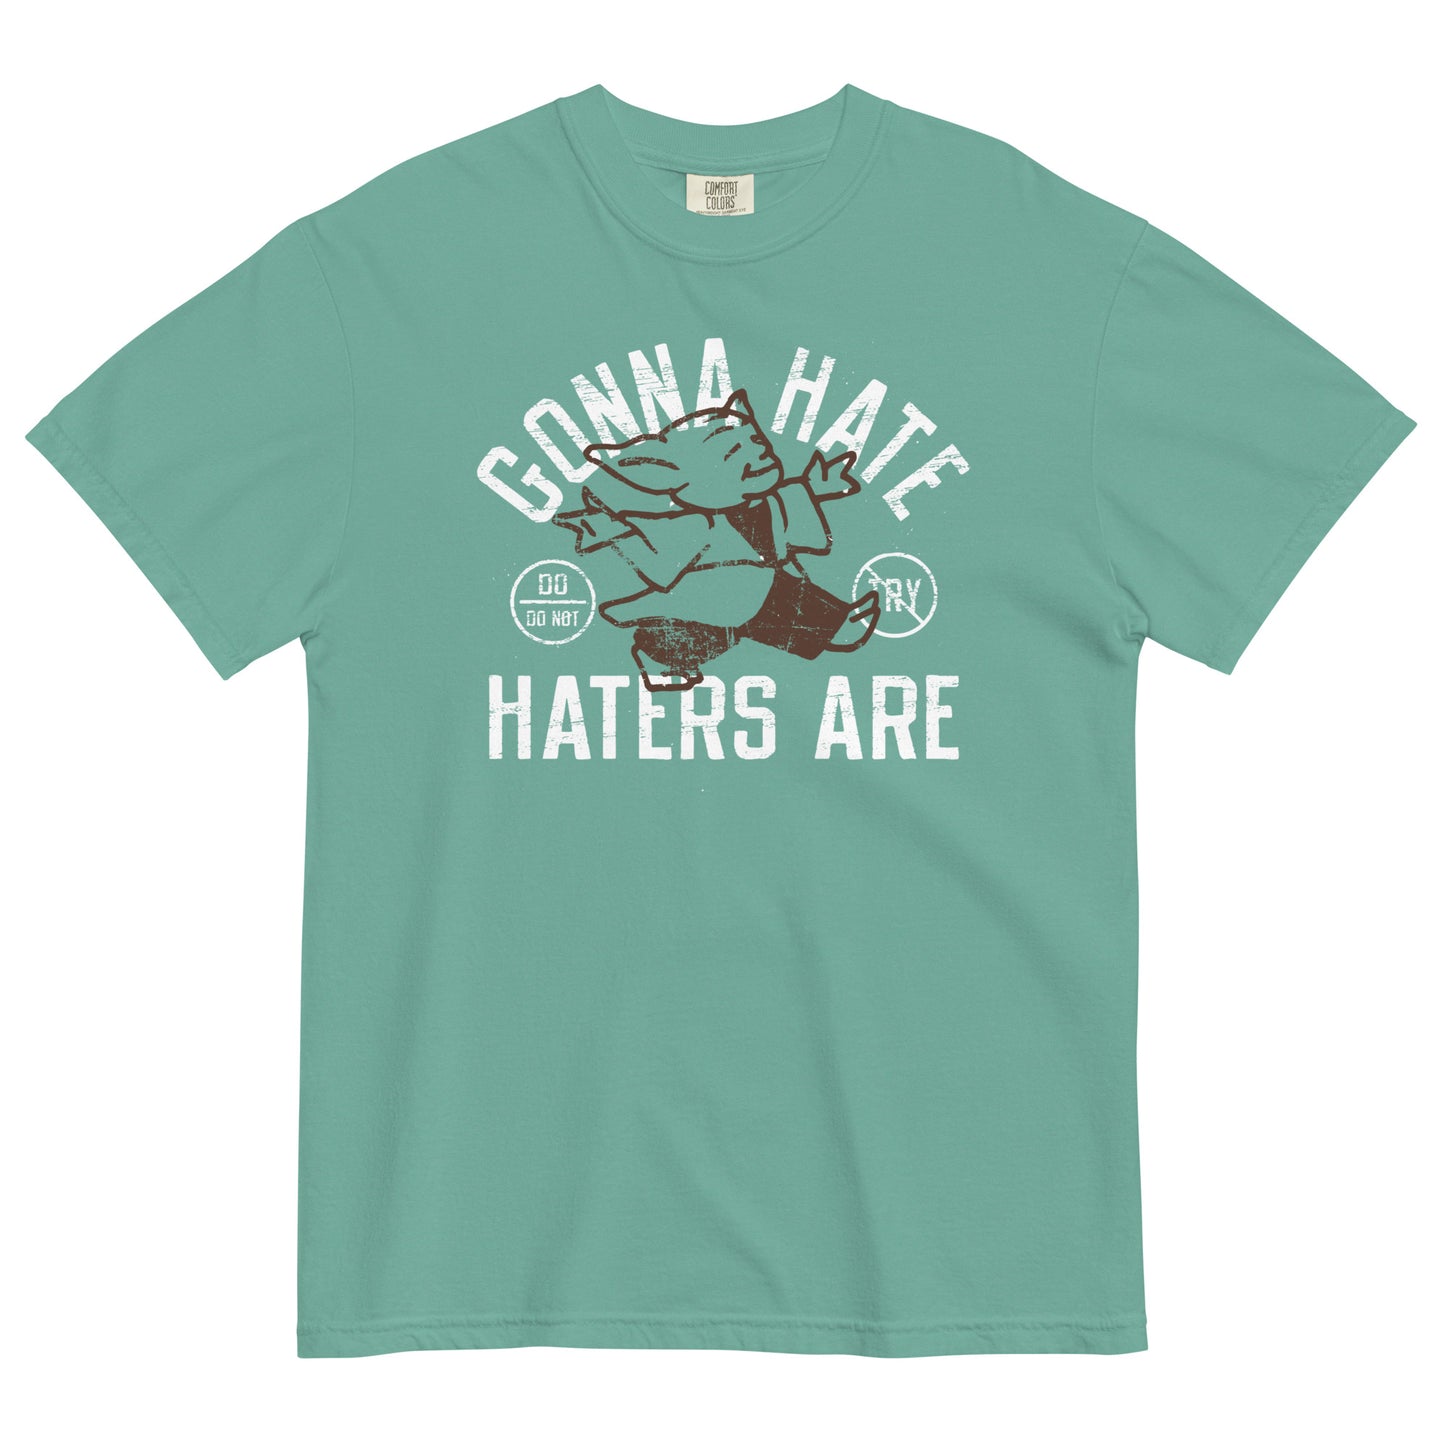 Gonna Hate Haters Are Men's Relaxed Fit Tee